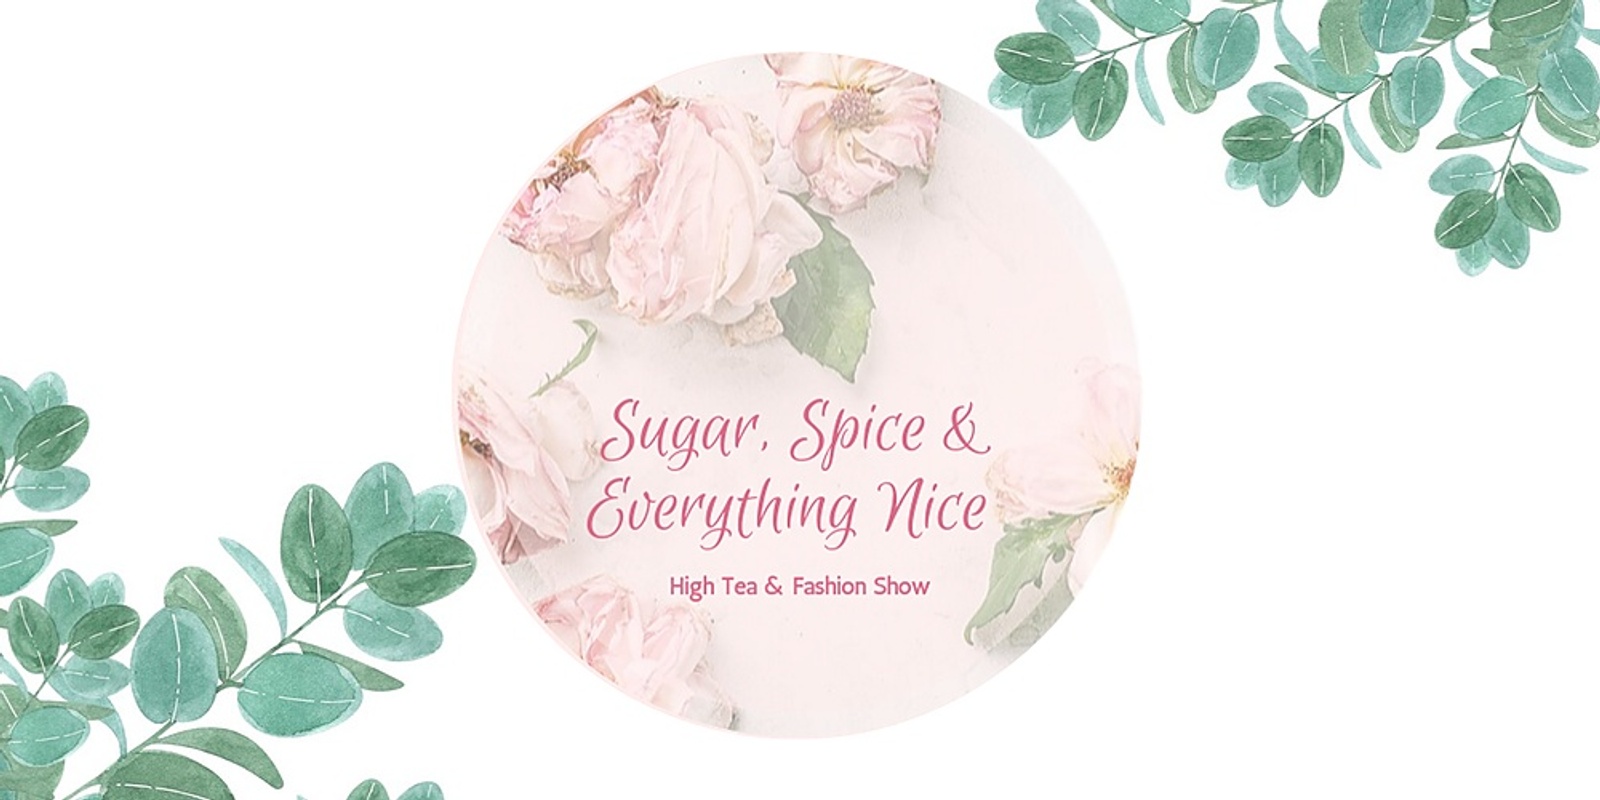 Banner image for Sugar, Spice & Everything Nice - High Tea & Fashion Show